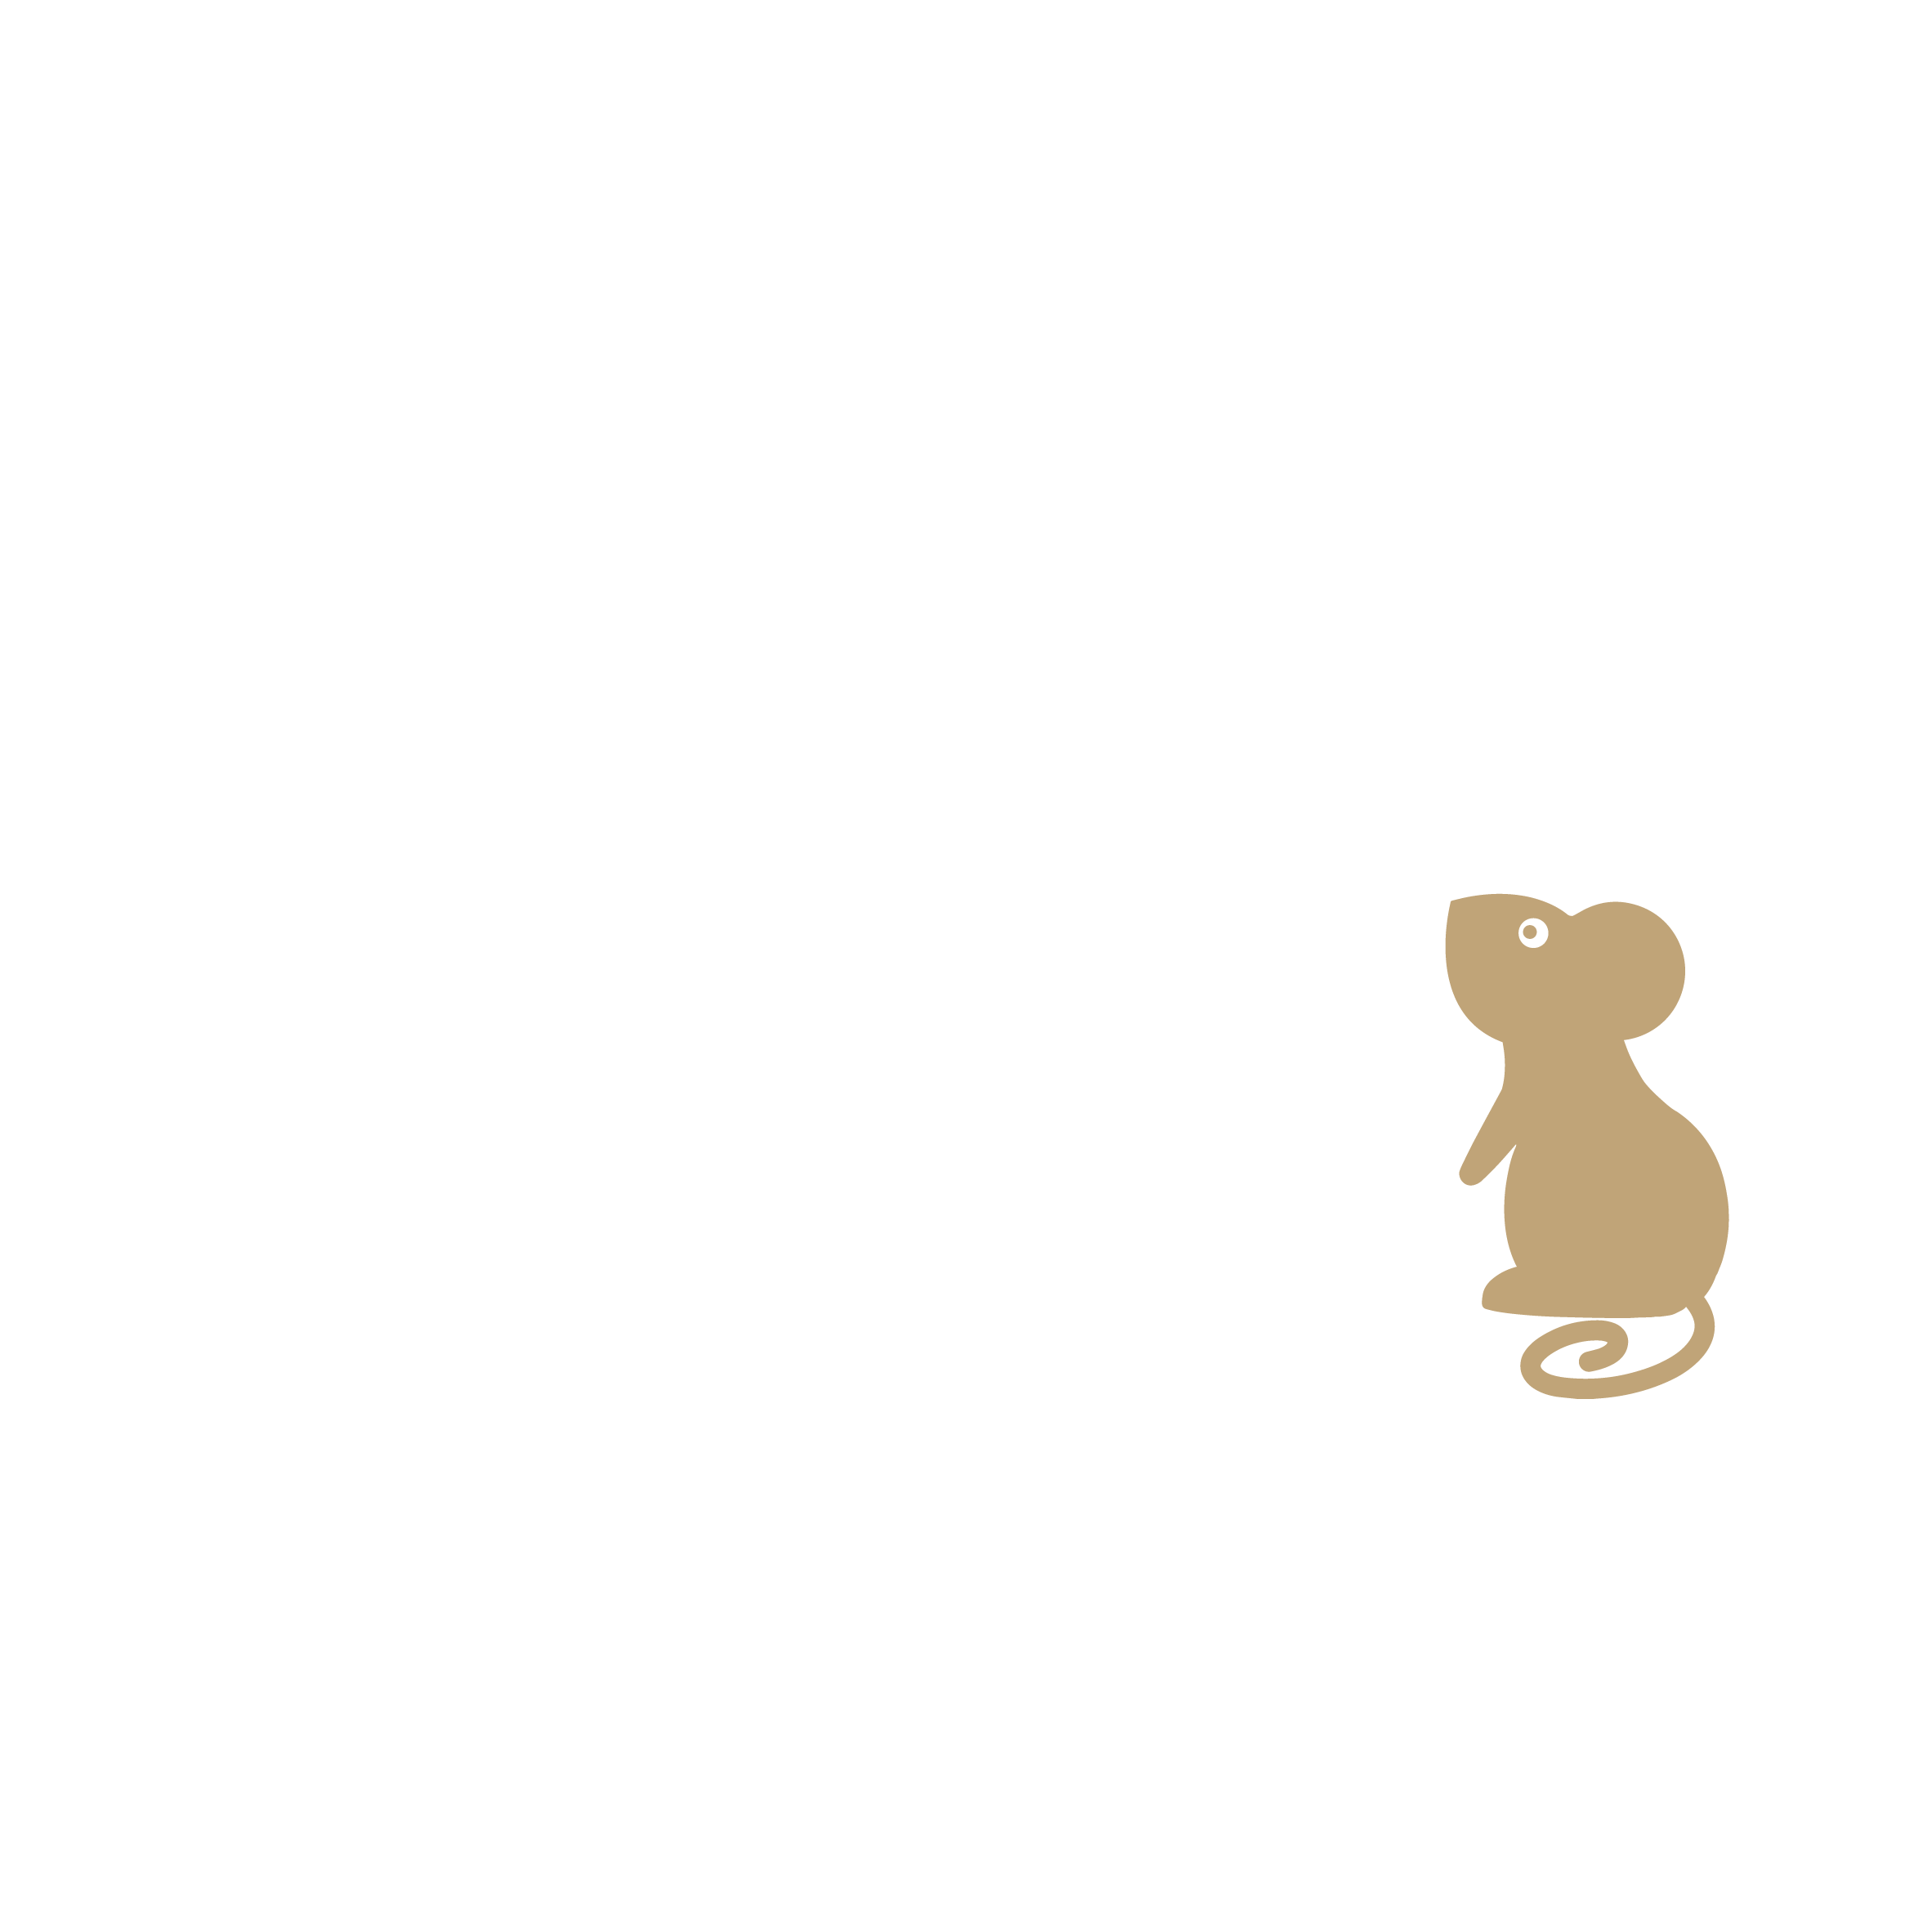 The Chuckling Cheese Company logo - home of the cheese